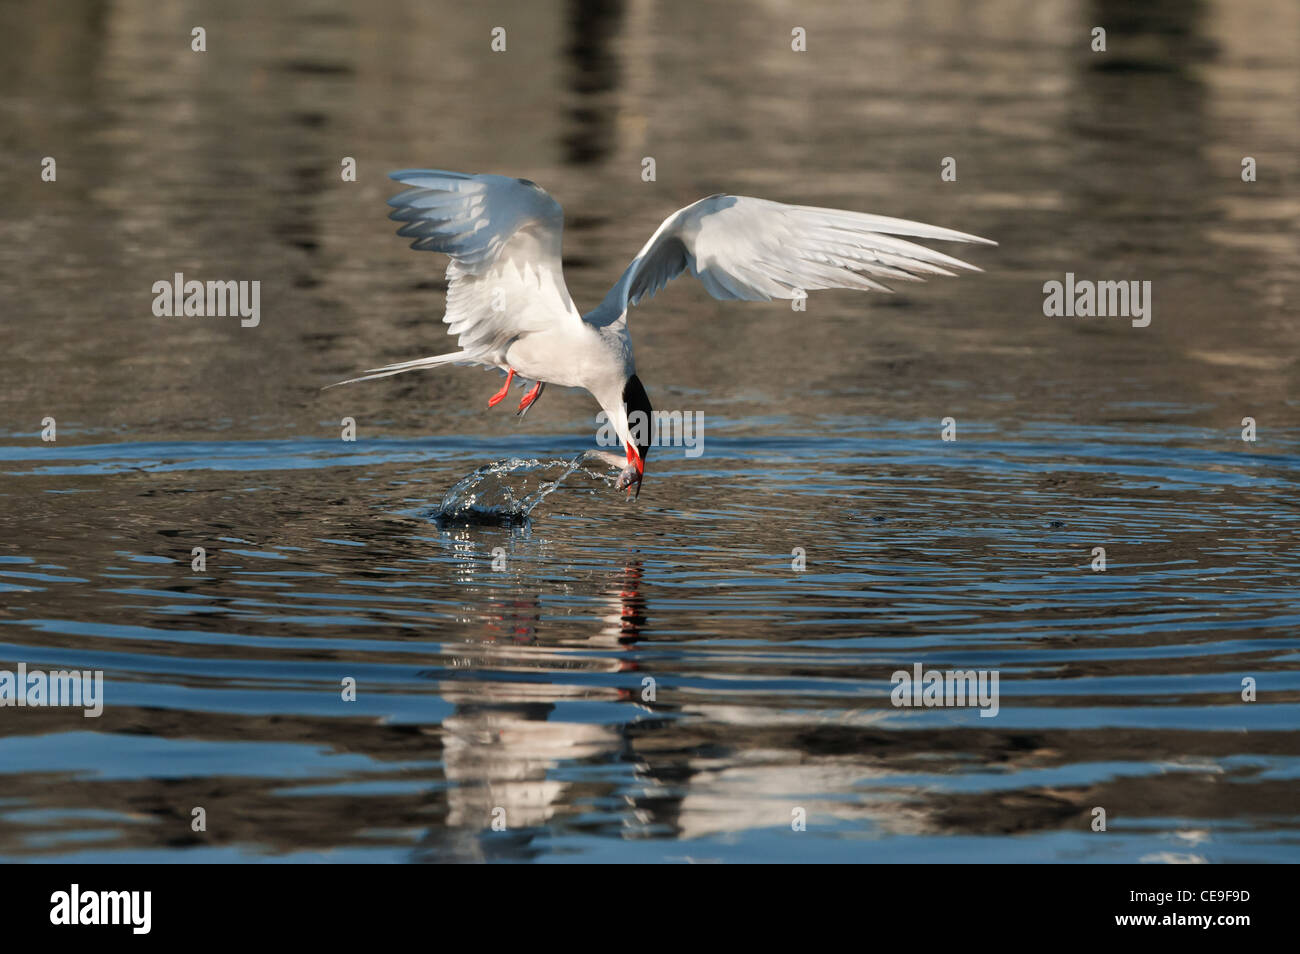 The common tern fishes, swimming in water. Stock Photo